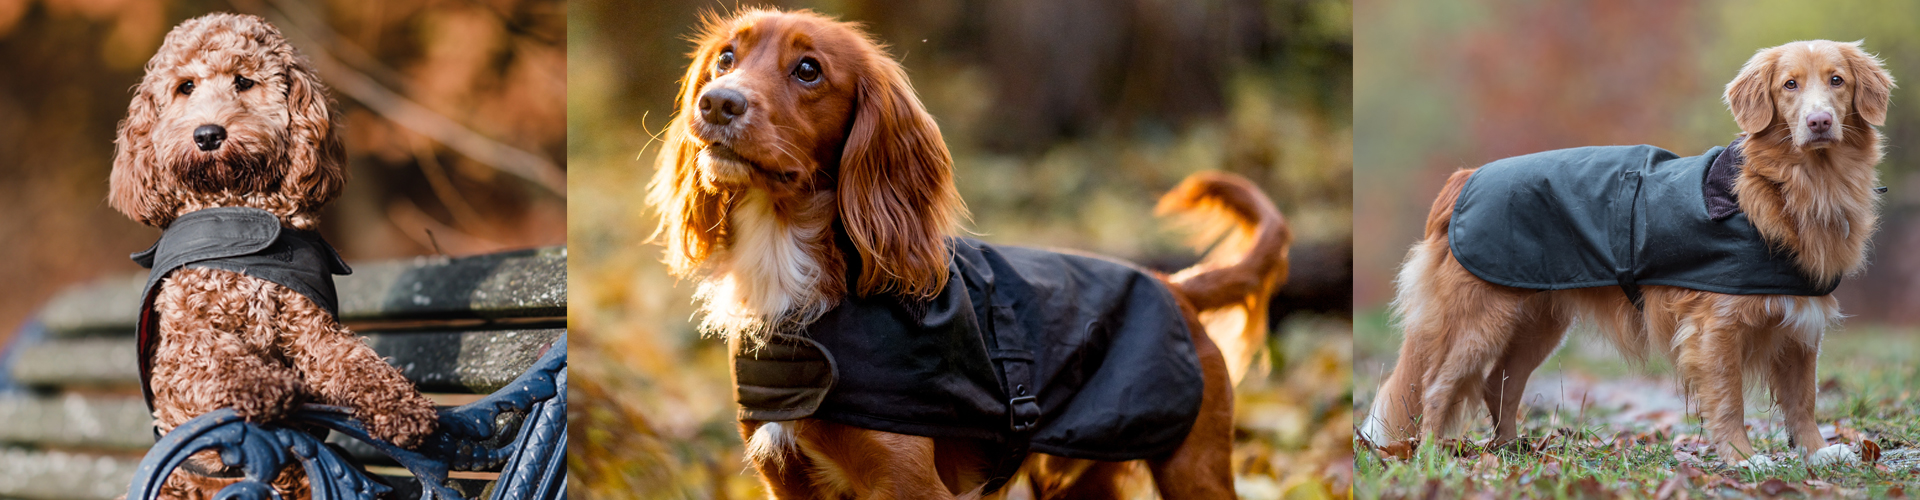 Barbour Christmas: Meet Our Christmas Barbour Dogs